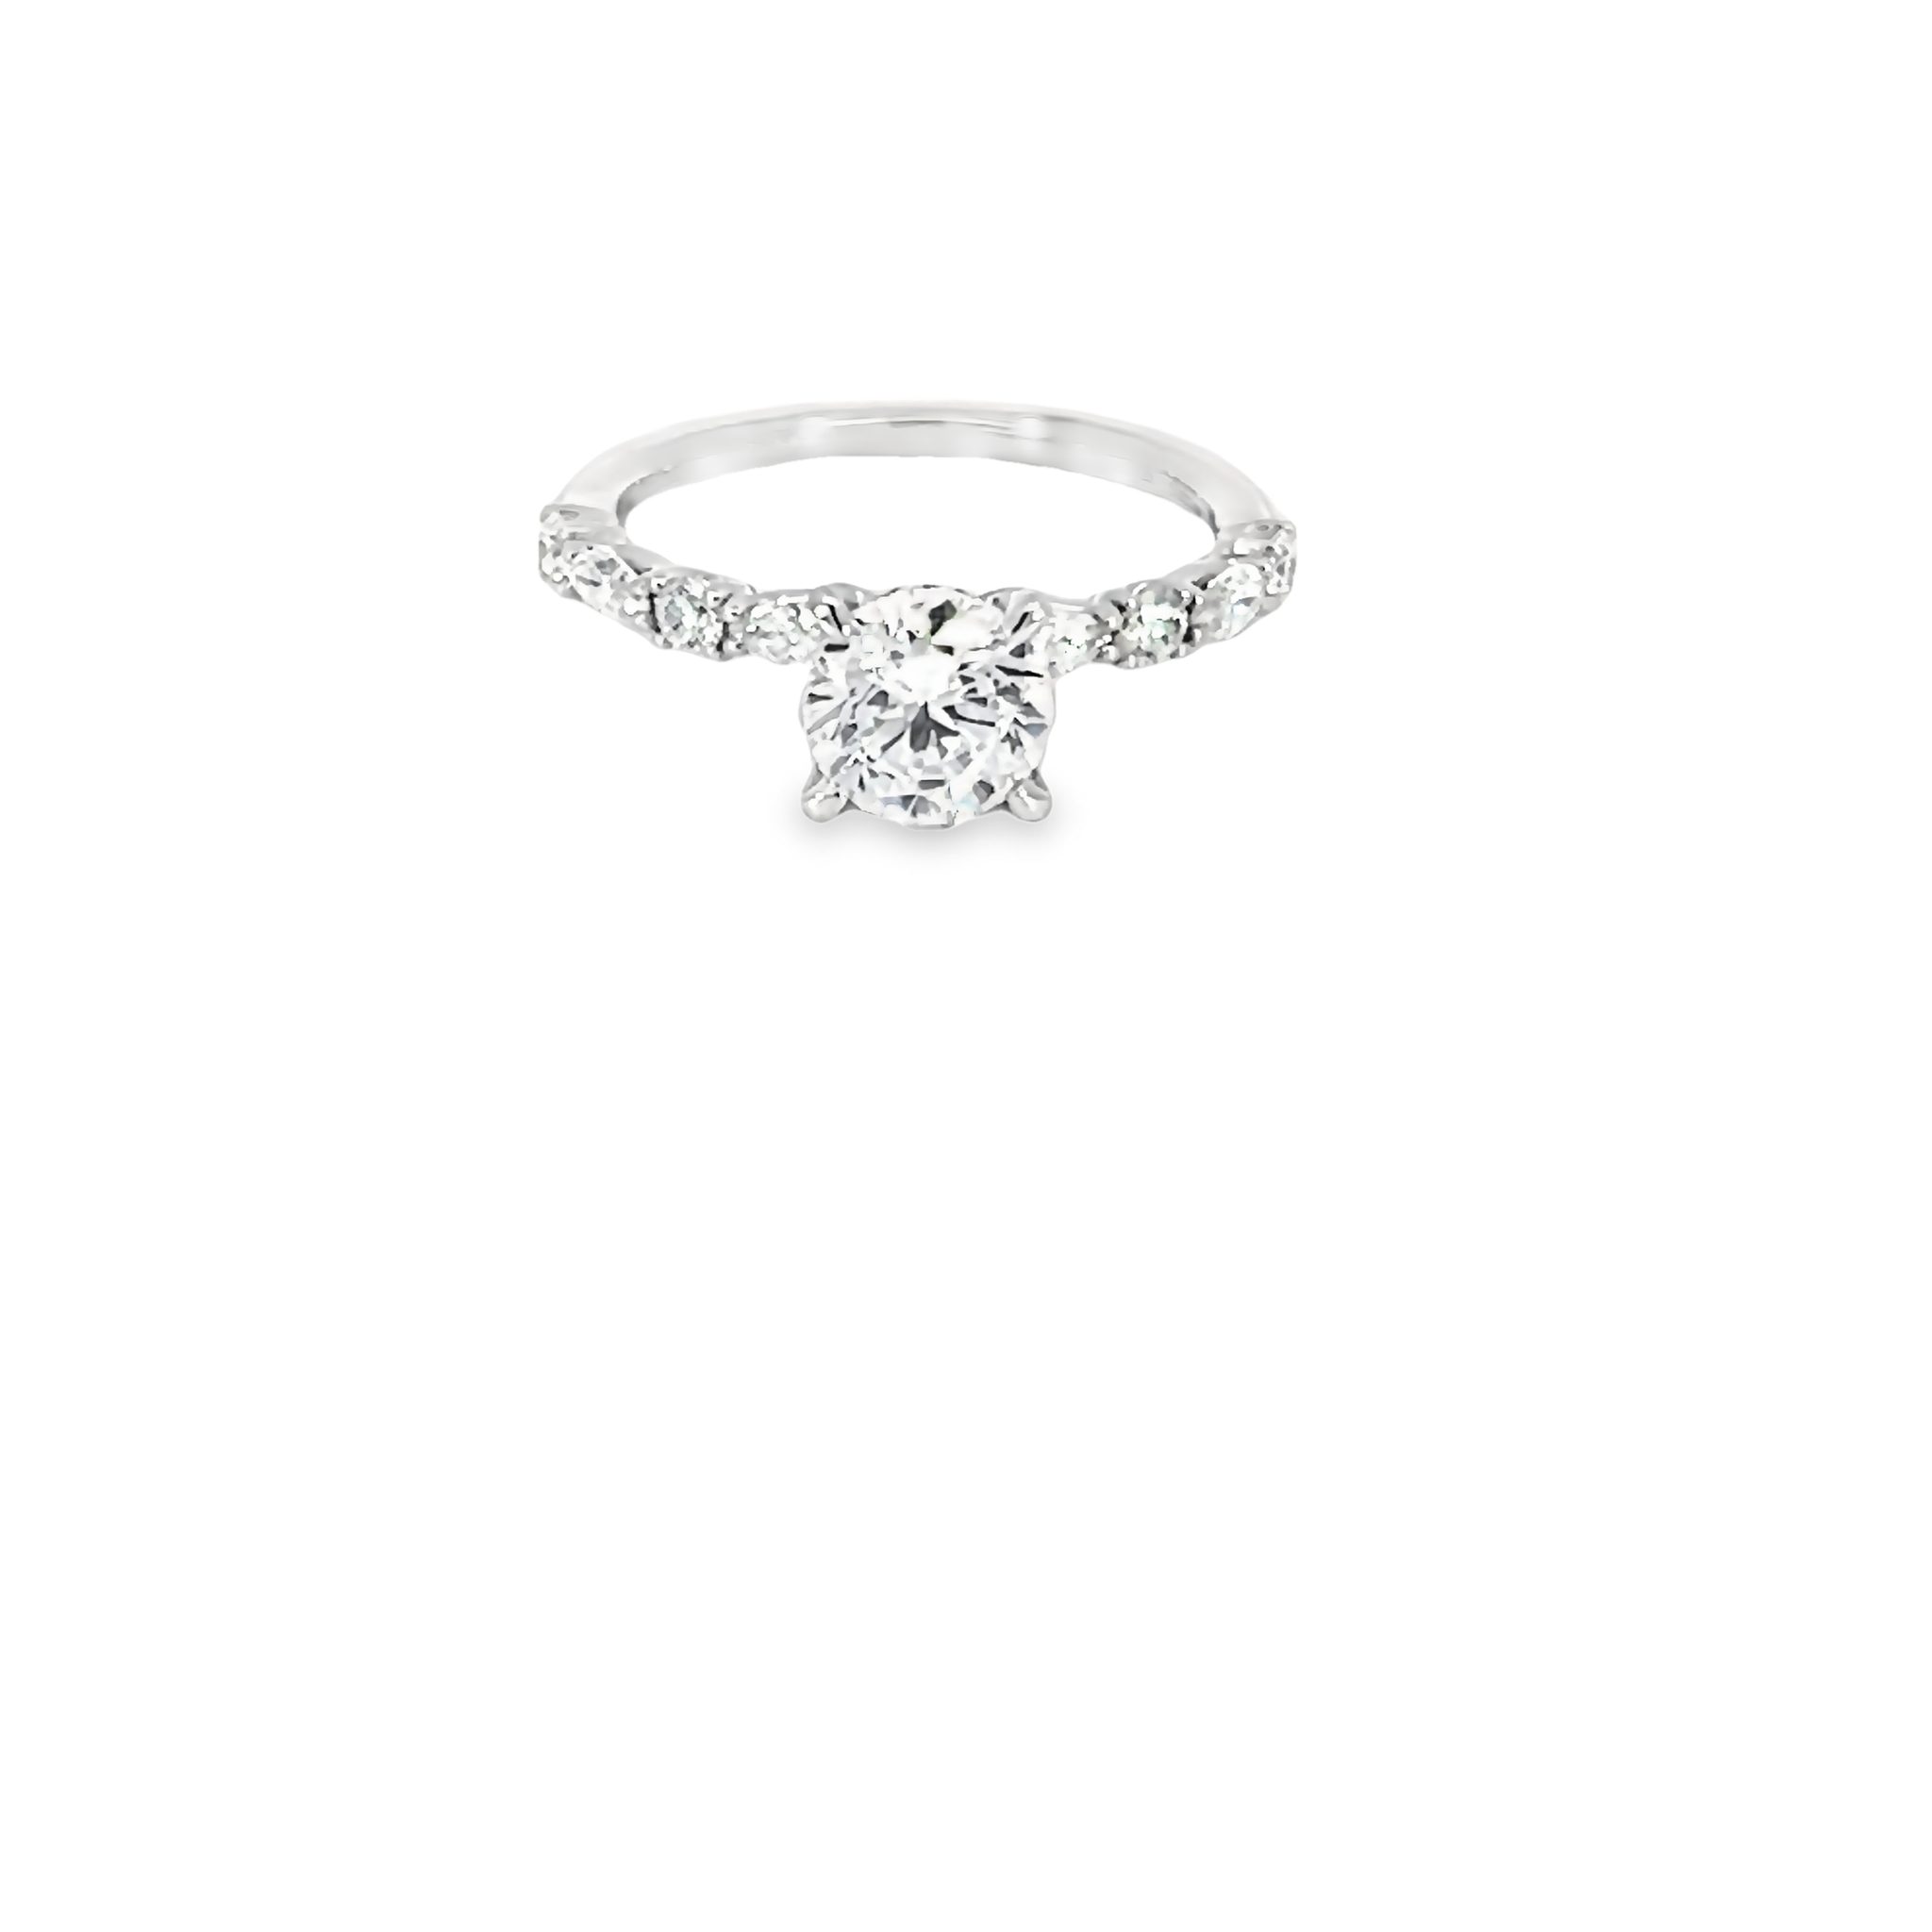 14 Karat White Gold Semi Mount Engagement Ring With 20=0.48 Total Weight Round Brilliant And Marquise G Vs Diamonds.  Size 6.25